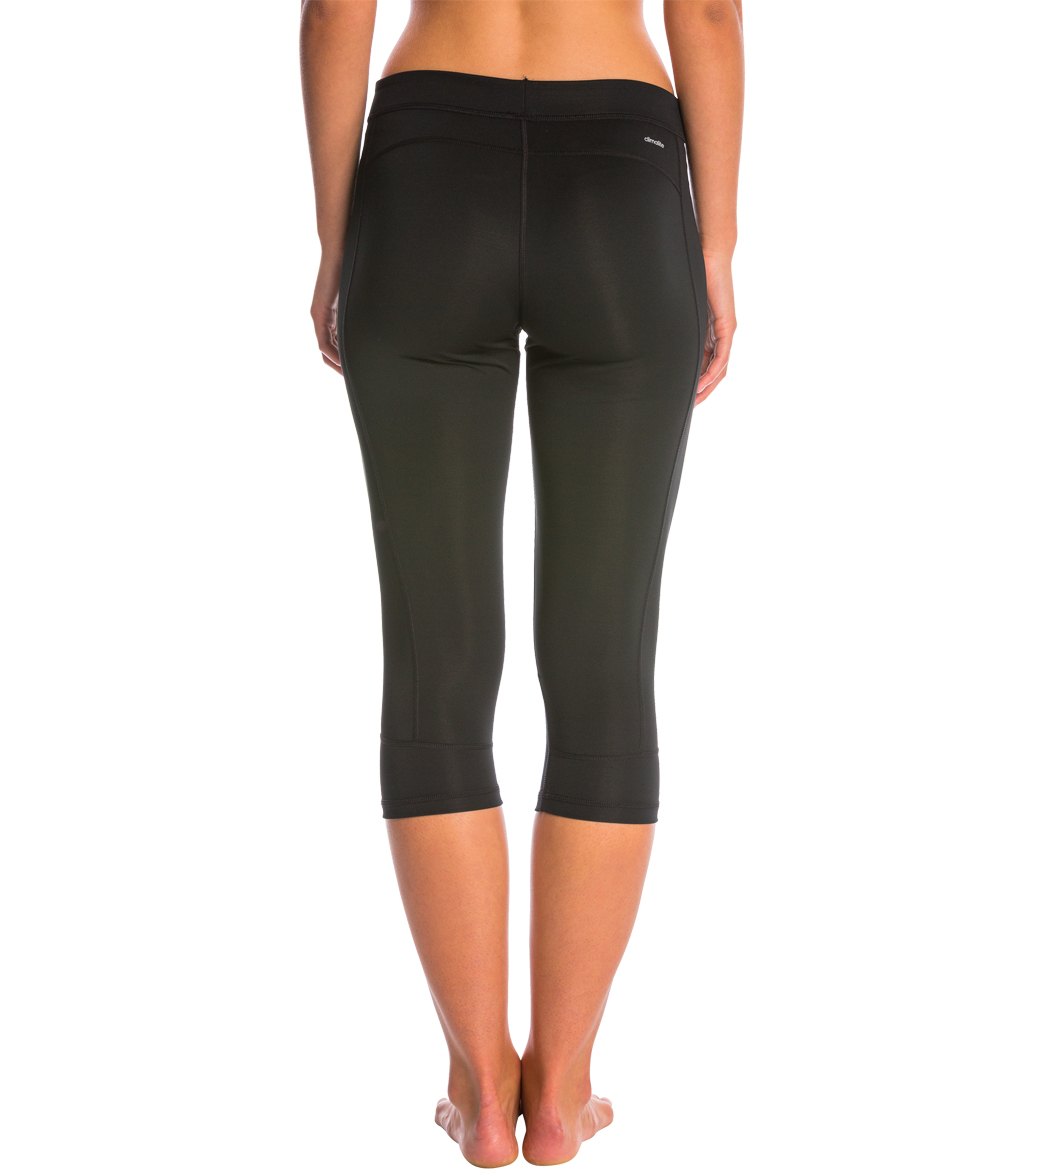 adidas Women's CLIMALITE 3/4 Capri Mid-Rise Workout Leggings (Lots of  Sizes) $15.95 Shipped (Or Cheaper If You Buy 2)